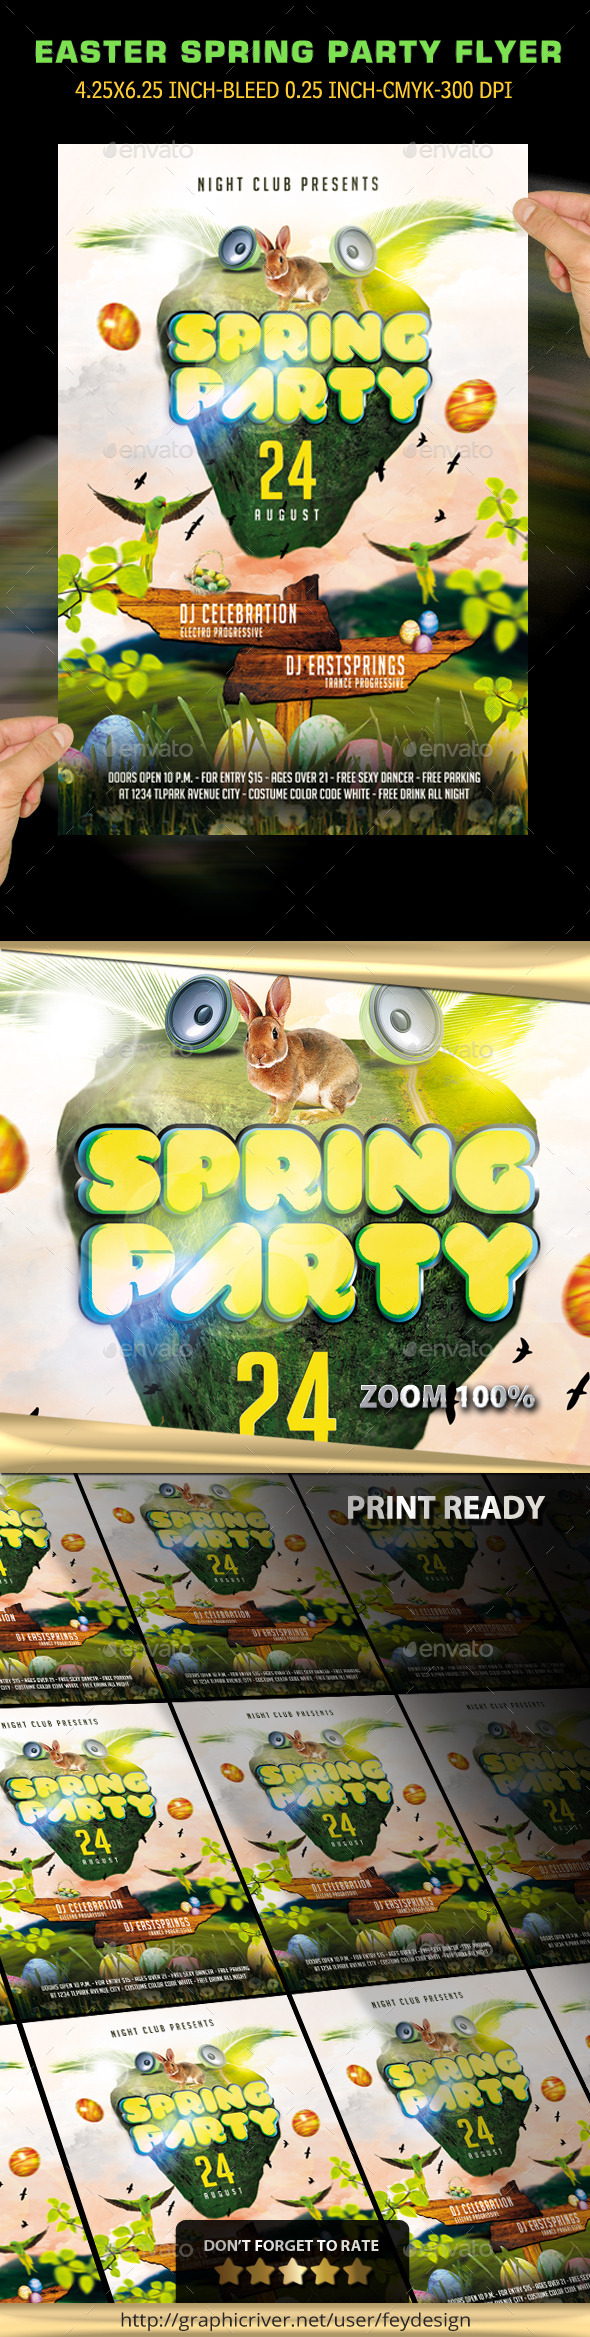 Easter Spring Party Flyer